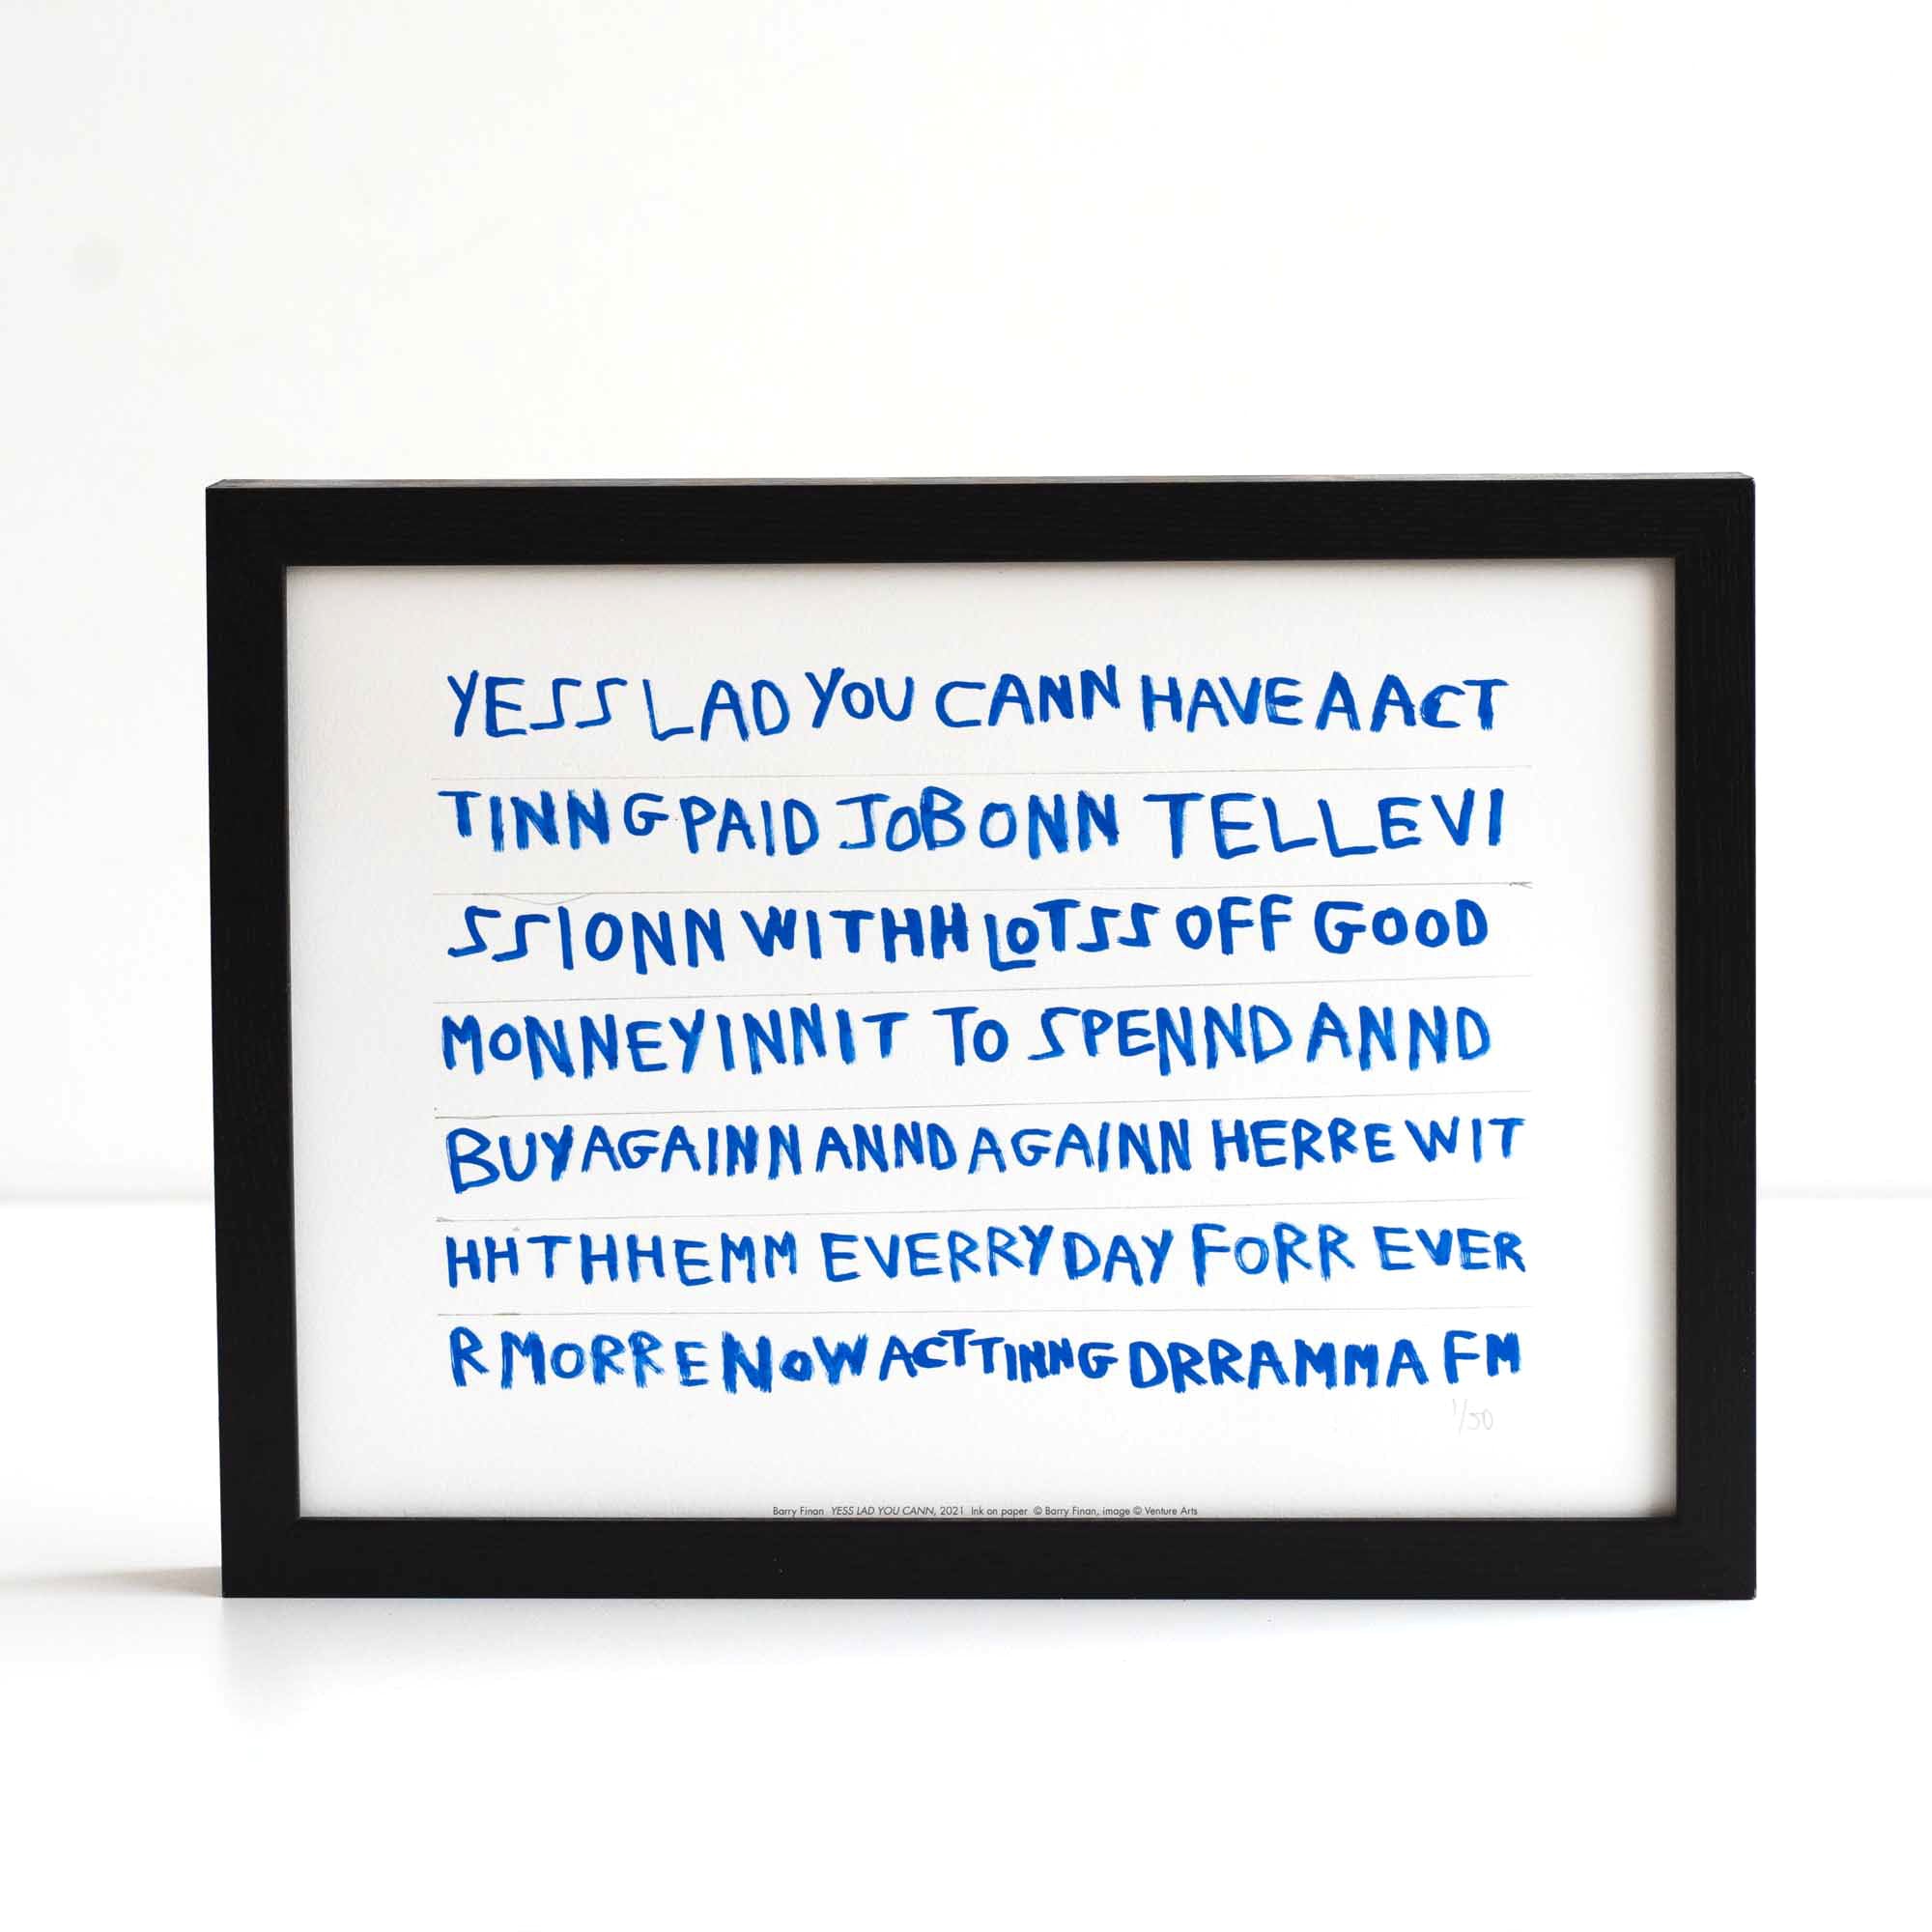 Framed print featuring word in blue capital letters